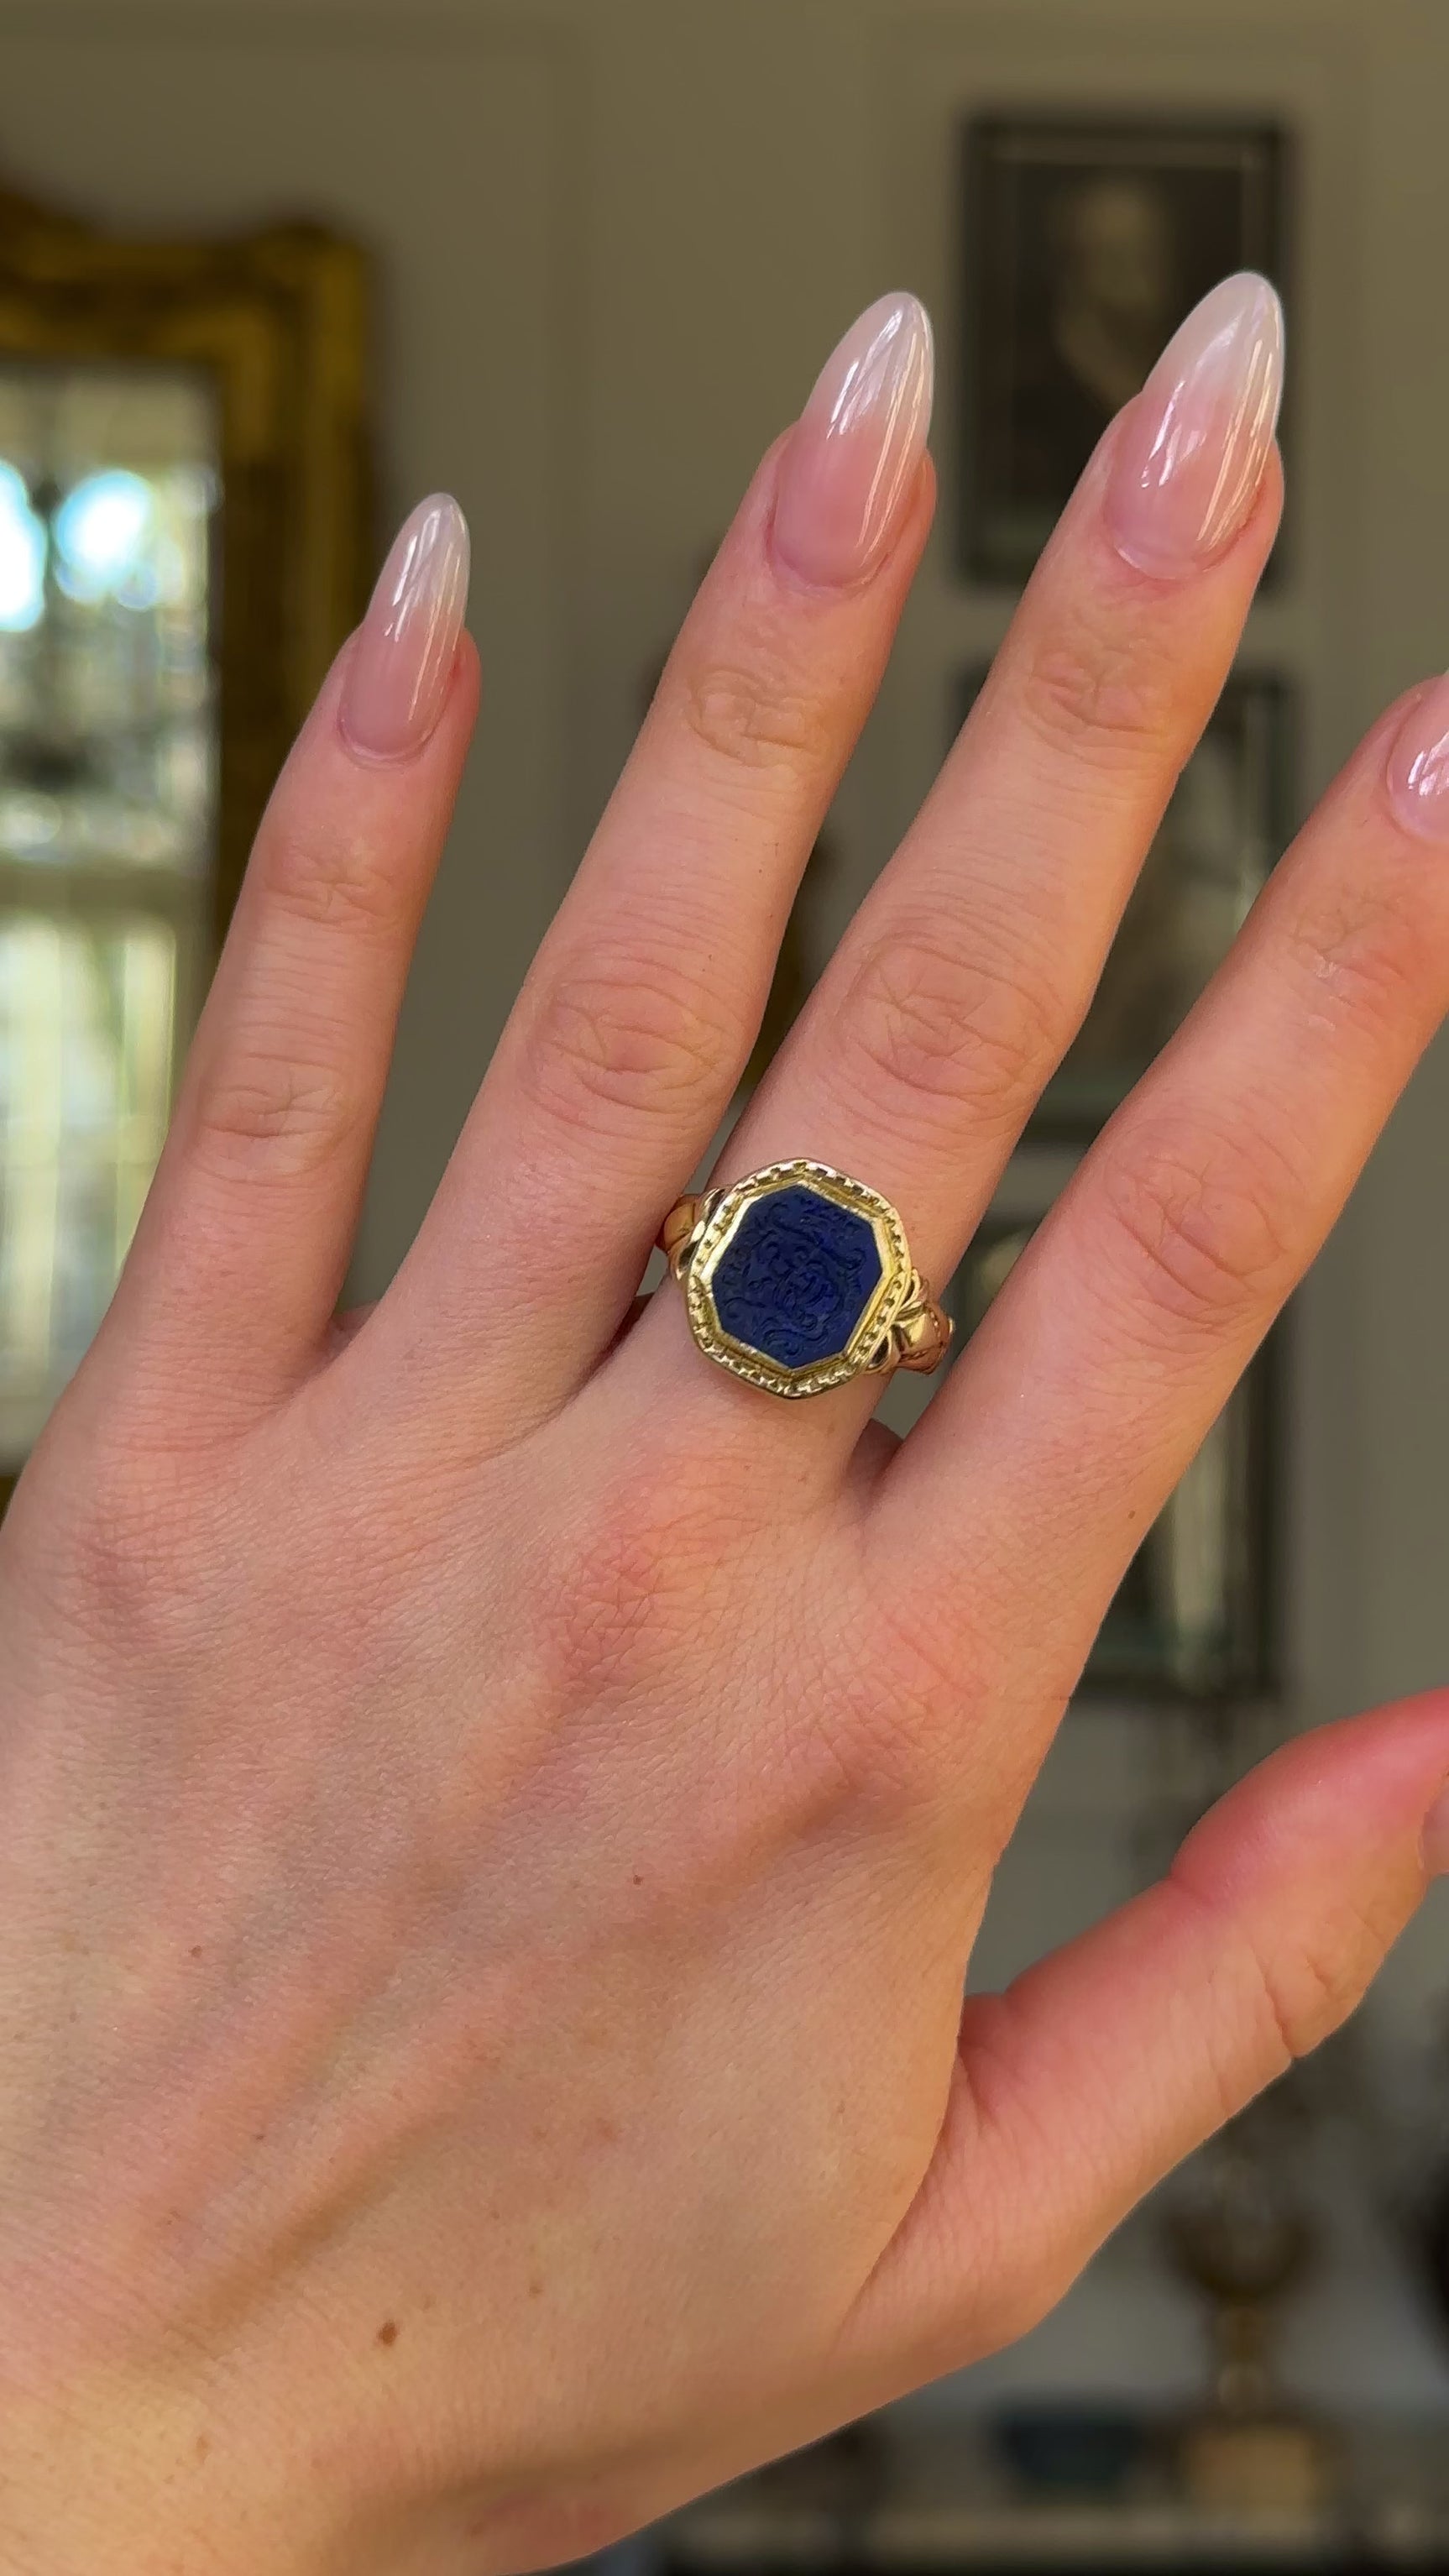 Antique, Victorian Lapis Intaglio Ring, 18ct Yellow Gold worn on hand and rotated to give perspective.